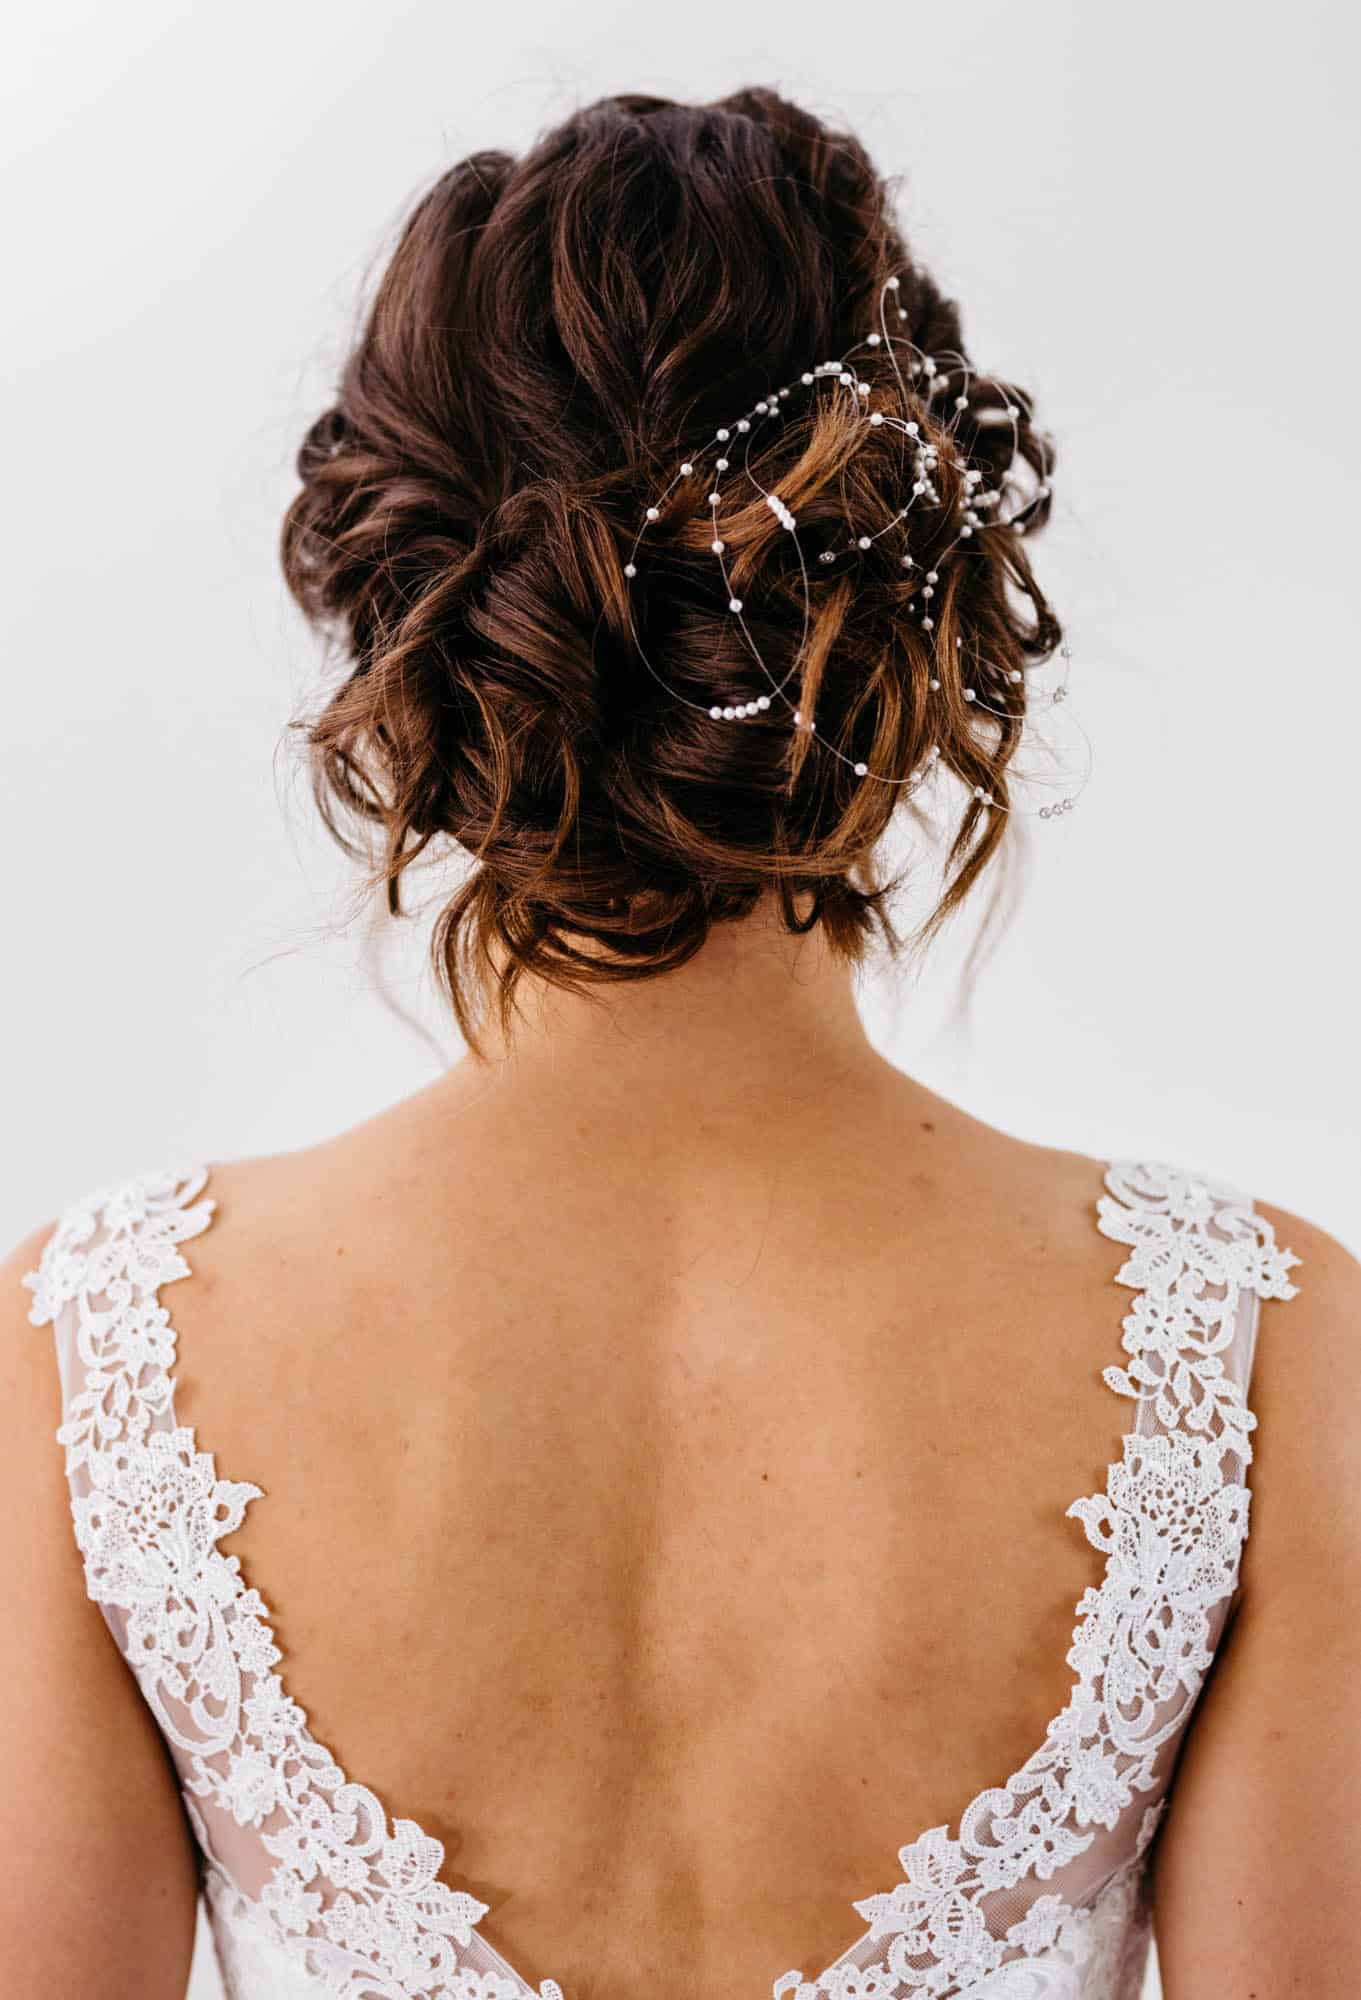     The back view of a woman in a wedding dress with lace and pearls, fitted with beautiful bridal hairstyles.